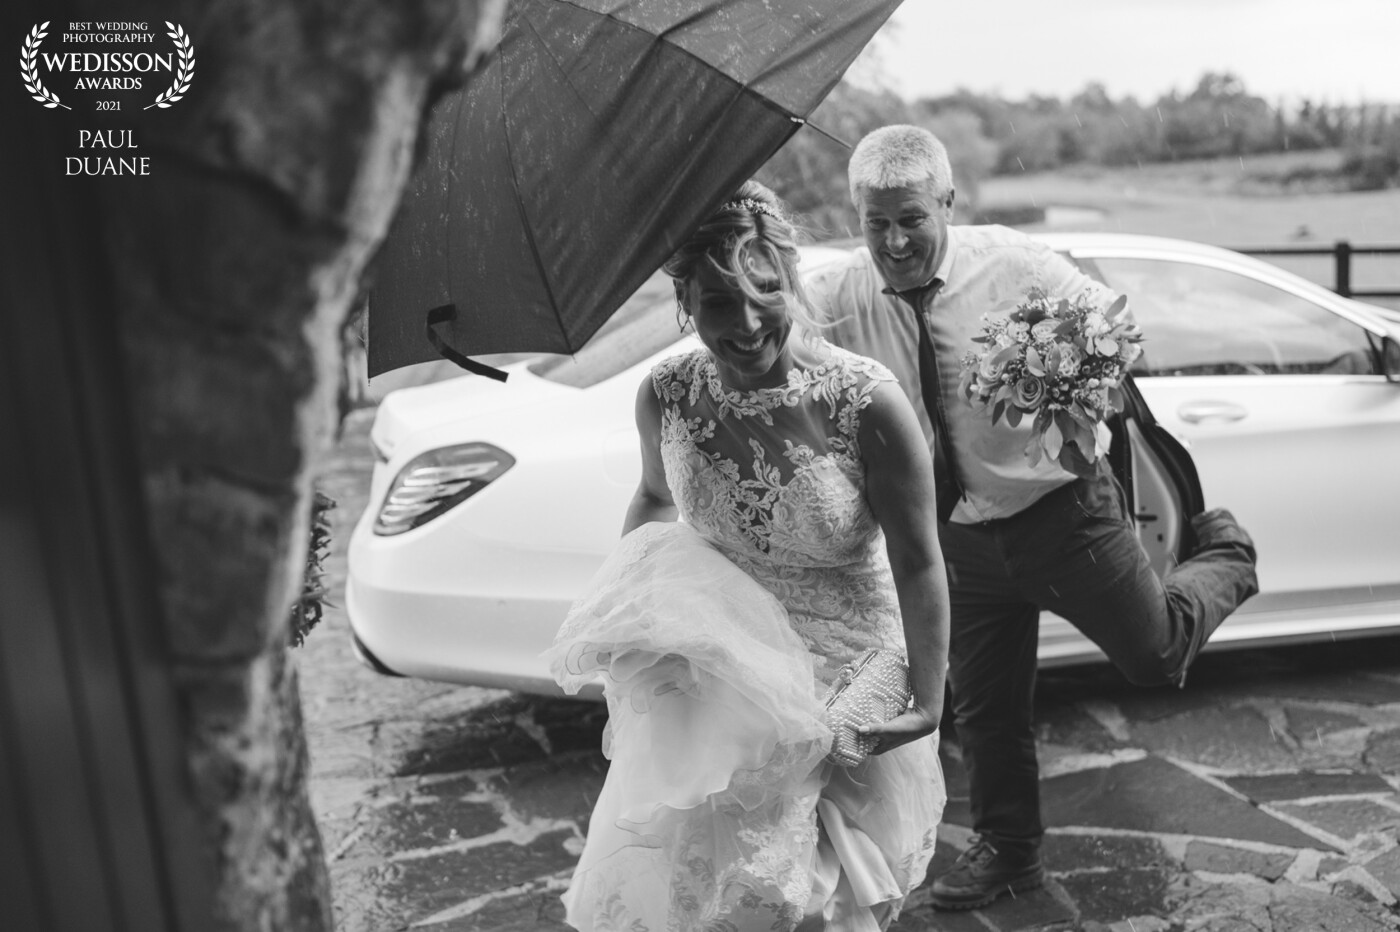 Our beautiful bride making a run for it to shelter from the rain, it was a gorgeous summers day and then the heavens just opened! That's the unpredictable Irish weather for you but they went on to have an amazing day and didn't let the rain dampen their special day.